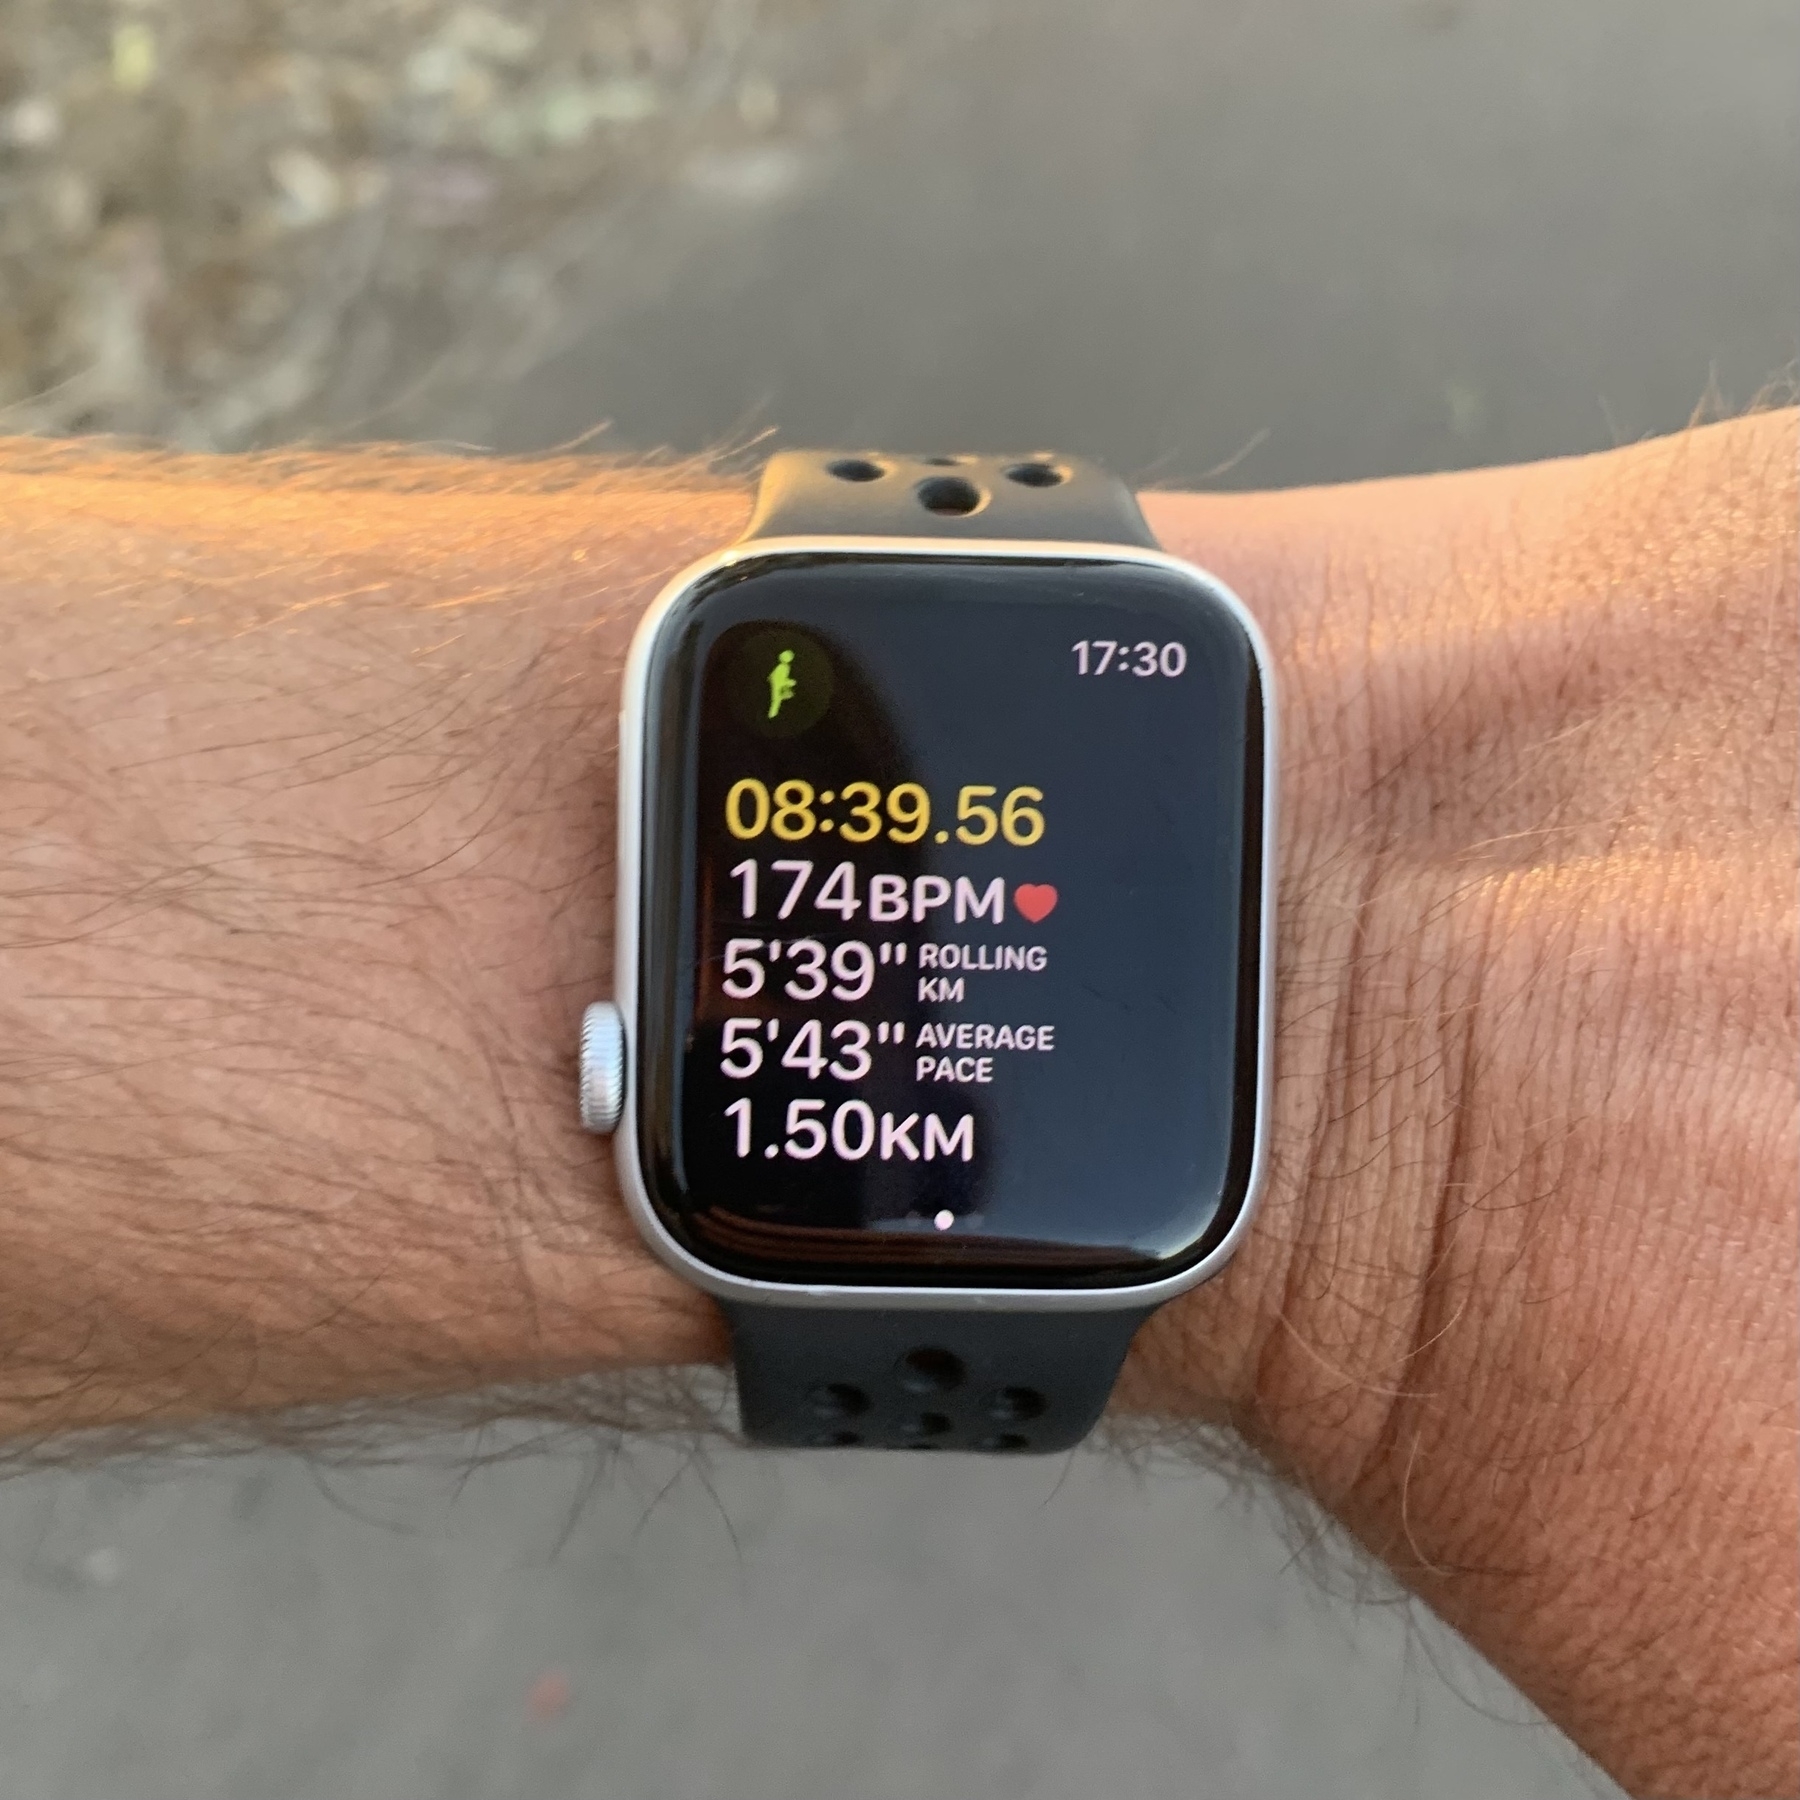 Action photo of my Apple Watch during a run showing a heart rate of 174bpm